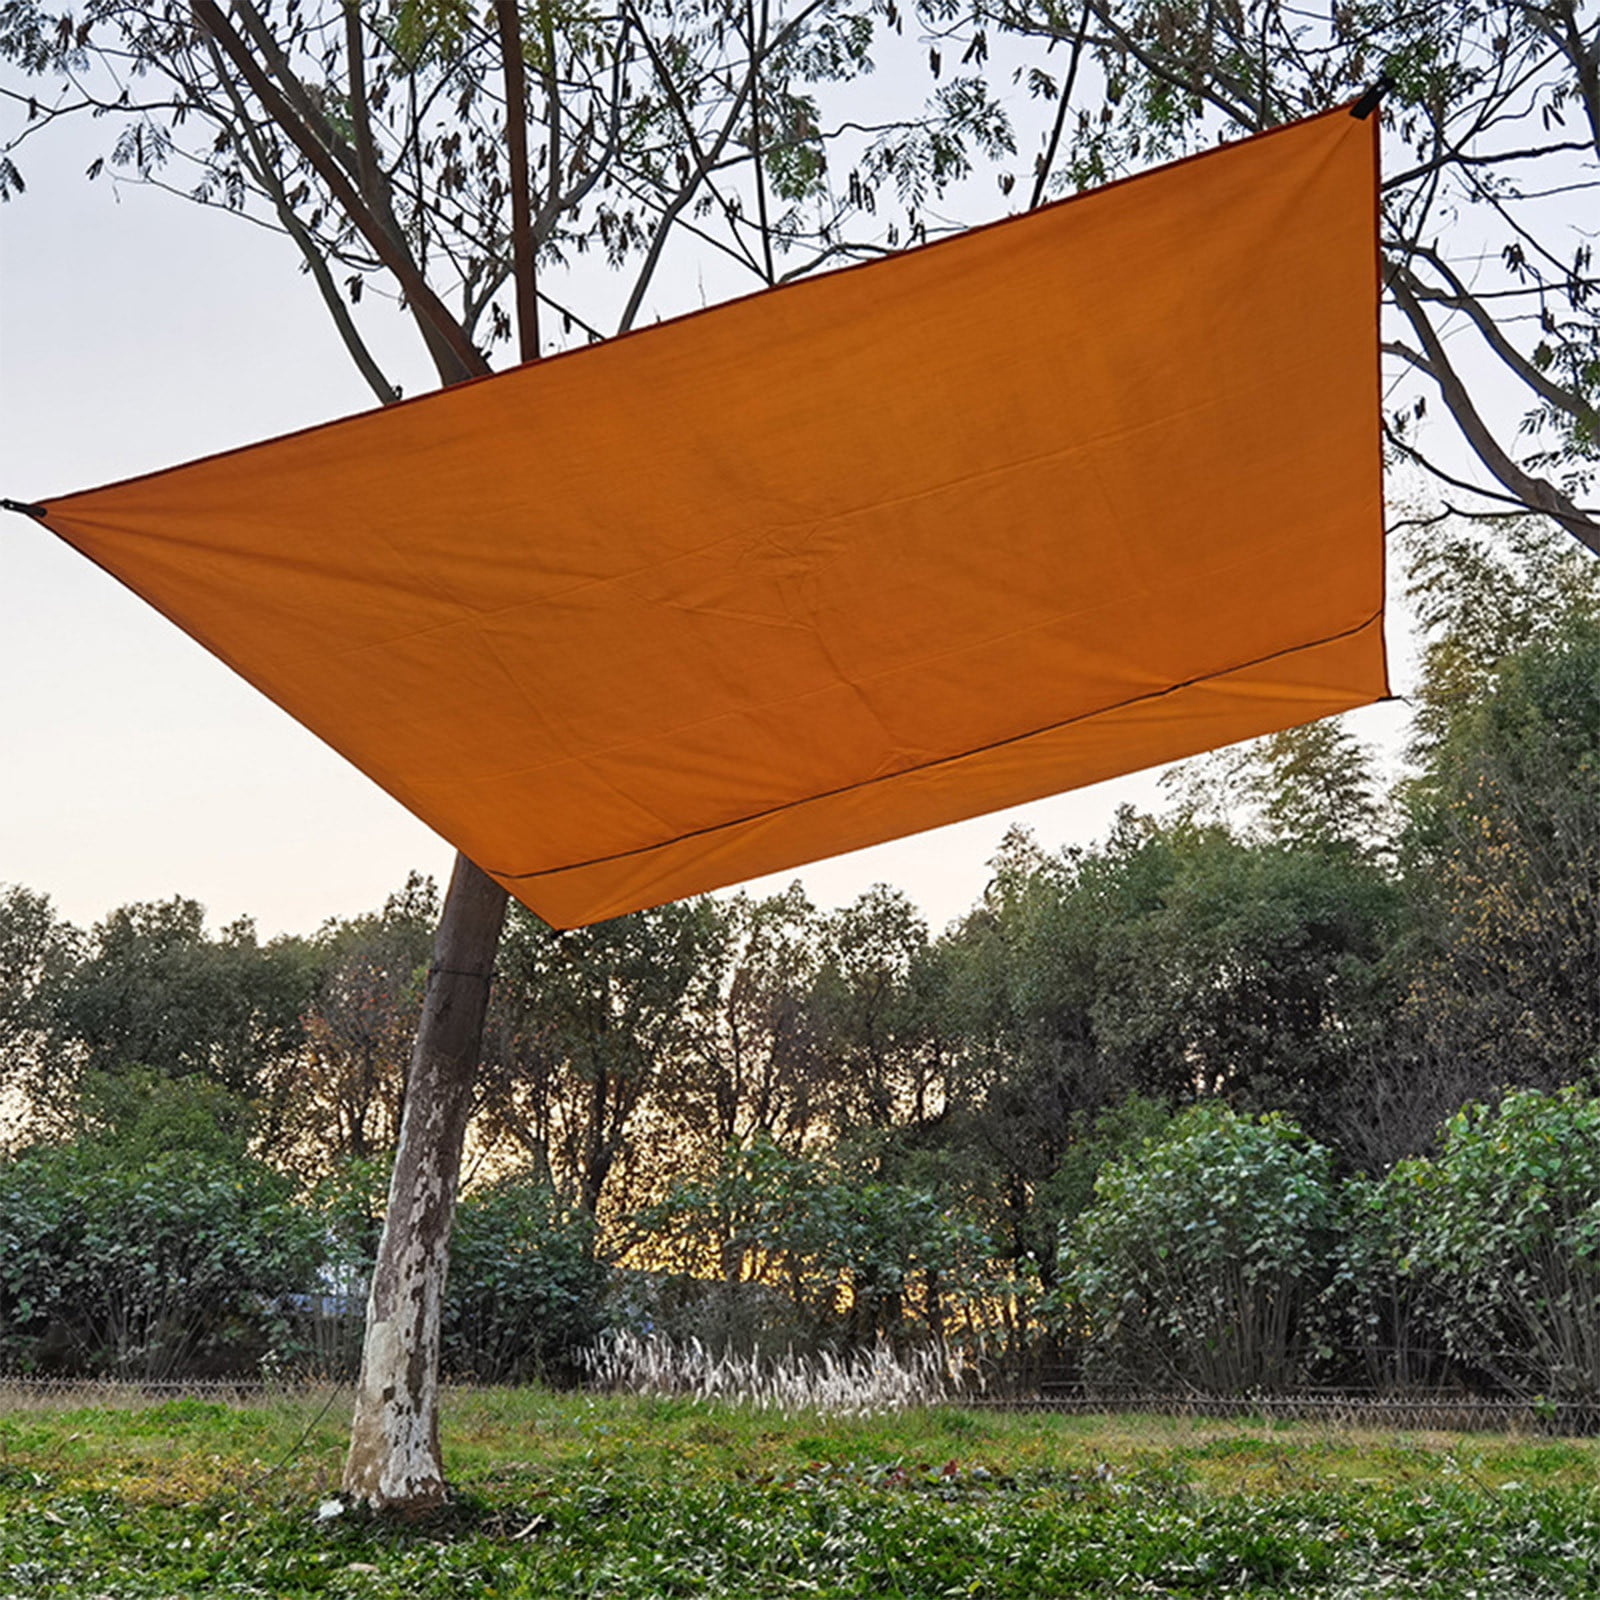 10ft×10ft Sun Shade Sail,Outdoor Waterproof Rectangle Sun Sail Shade,Pergola Canopy,95% UV Block,210D Double-Layer Oxford Cloth,for Patio Garden Backyard Lawn Swimming Pool Blue 